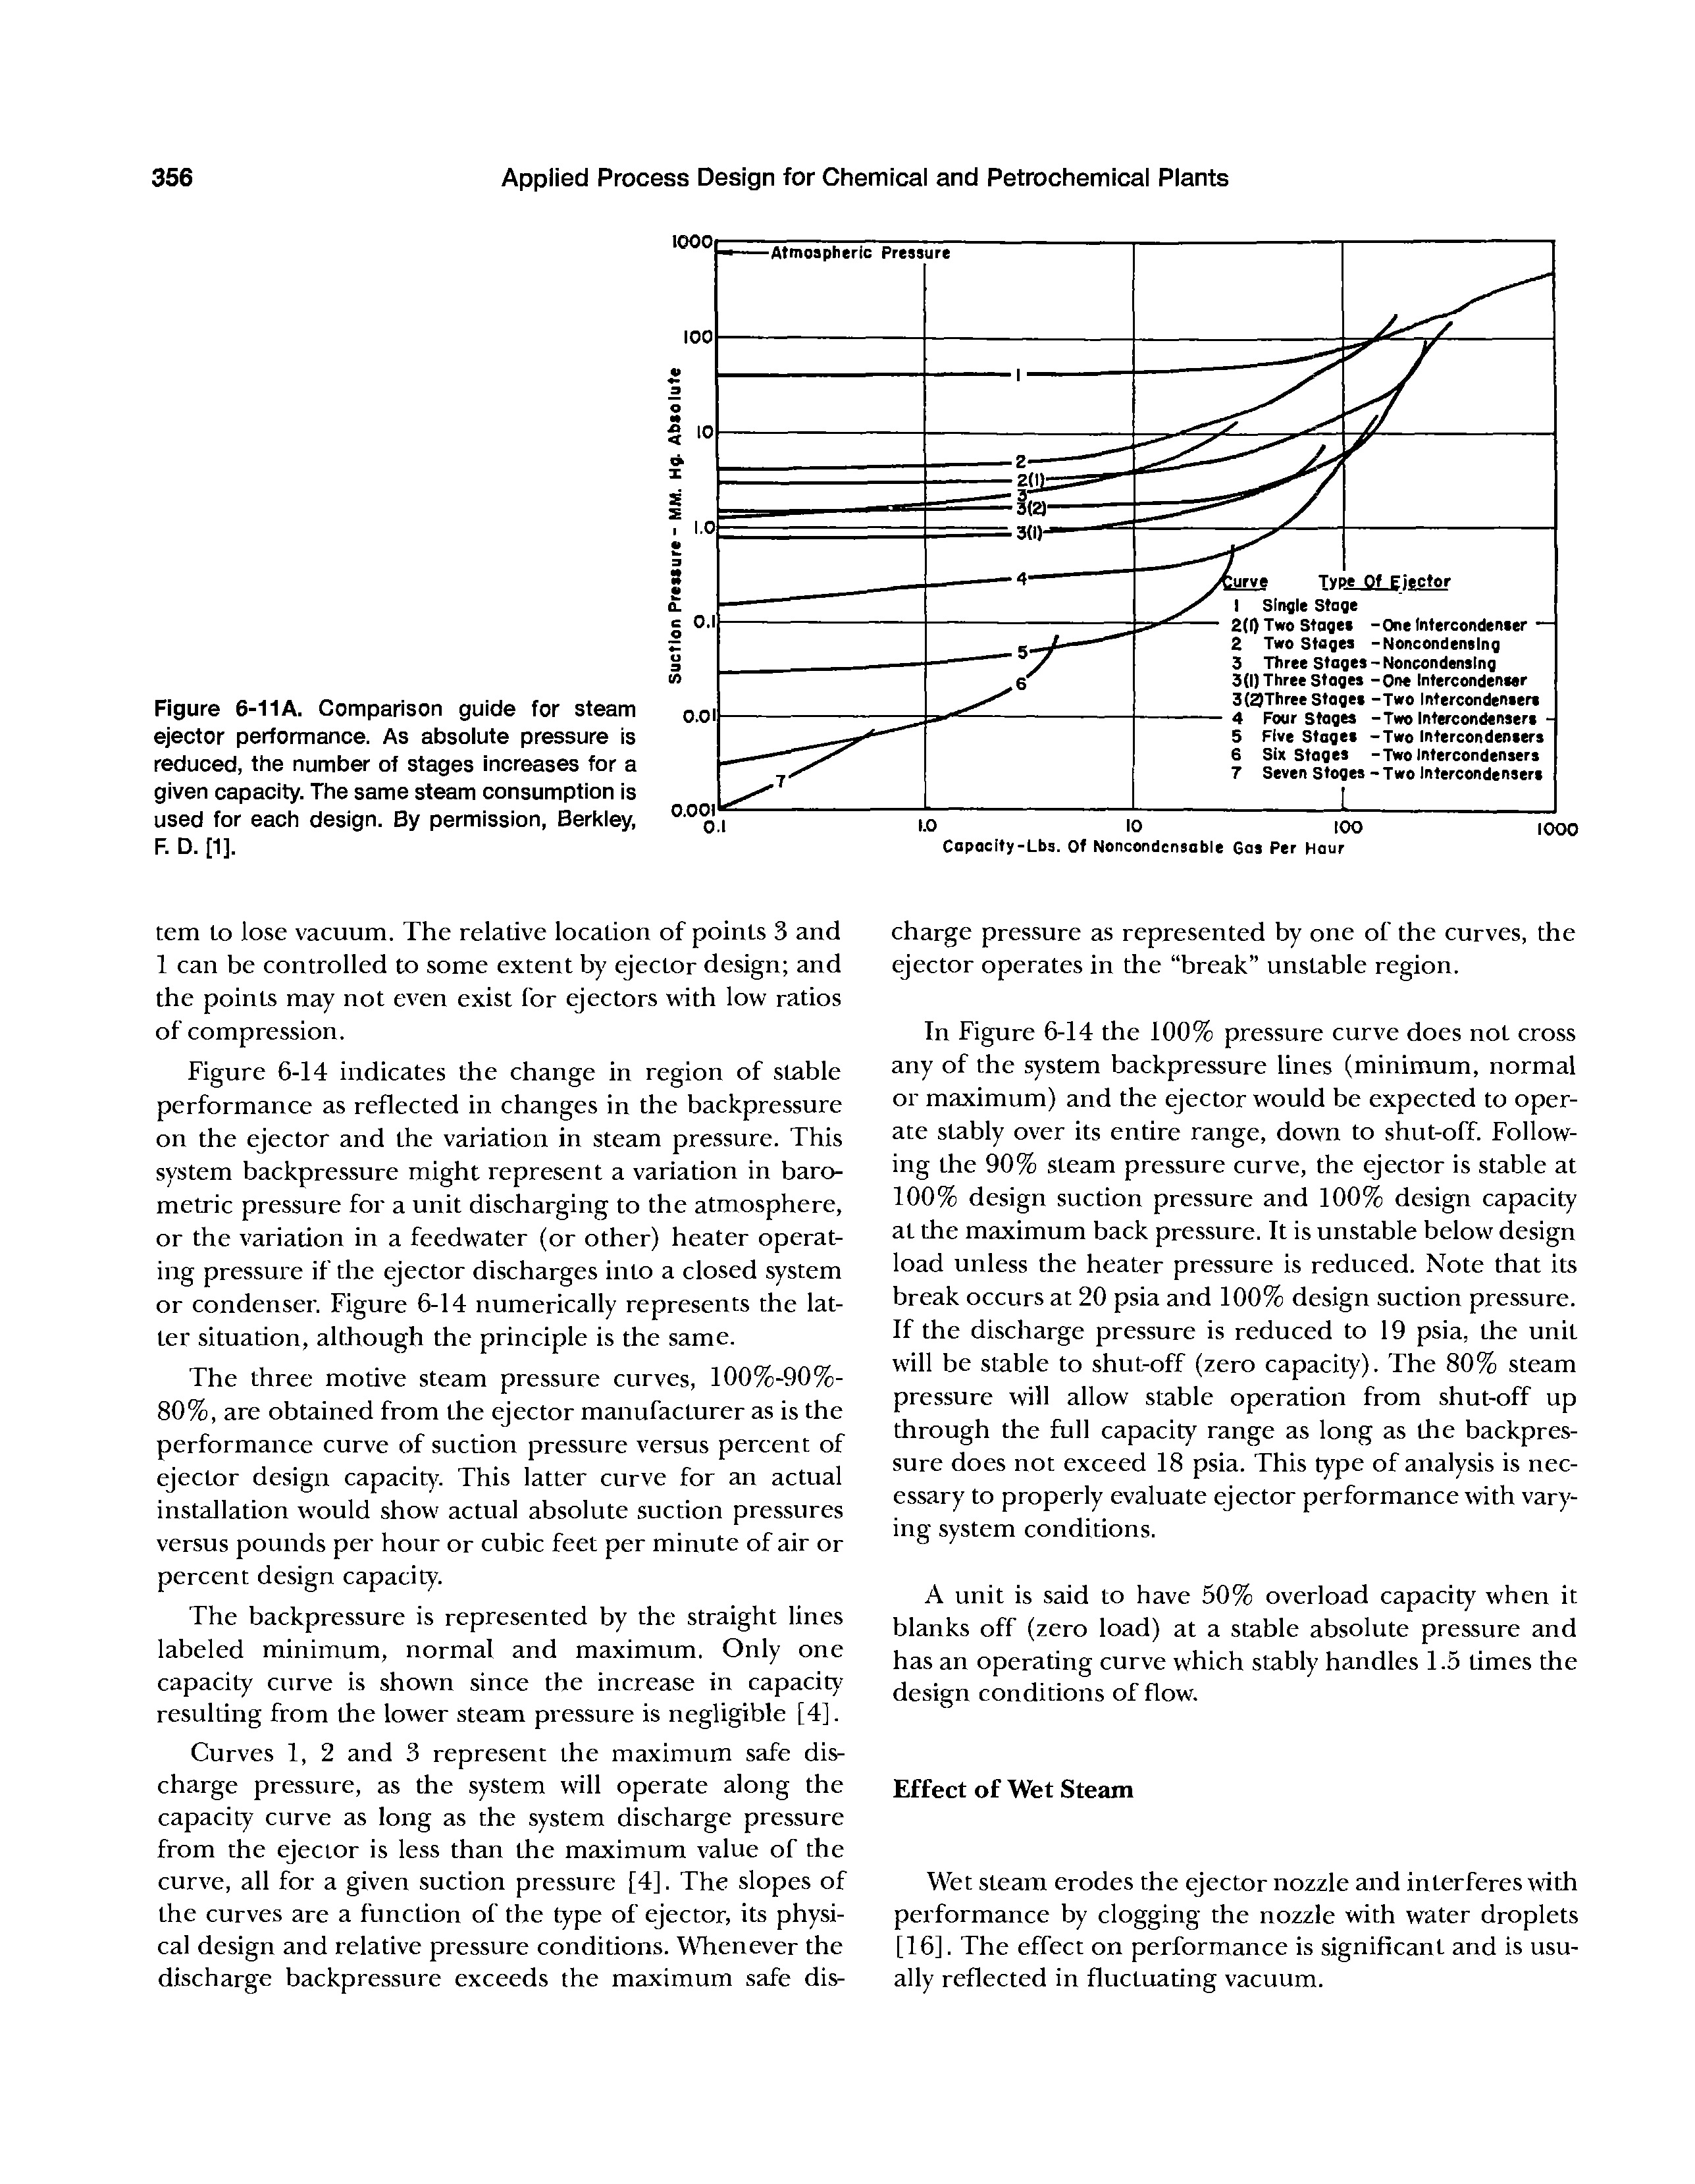 Figure 6-11 A. Comparison guide for steam ejector performance. As absolute pressure is reduced, the number of stages increases for a given capacity. The same steam consumption is used for each design. By permission, Berkiey, F. D. [1].